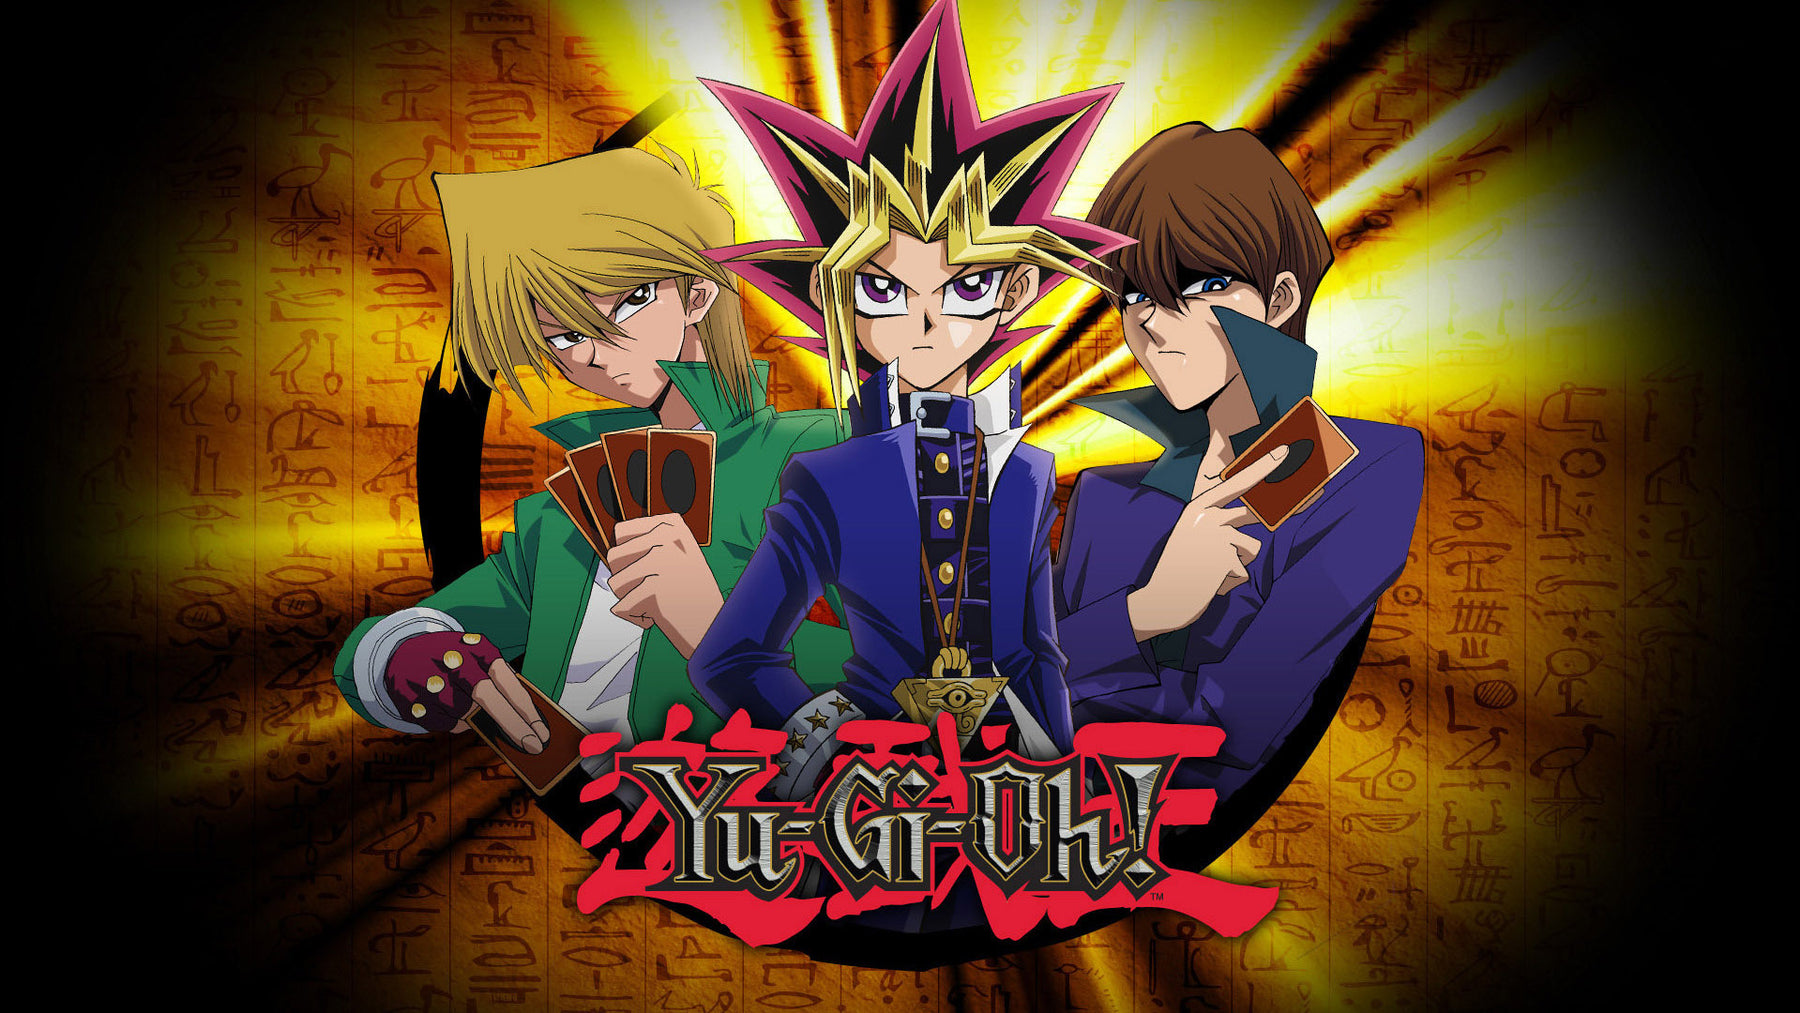 A Beginners Guide to the Yu-Gi-Oh! Trading Card Game